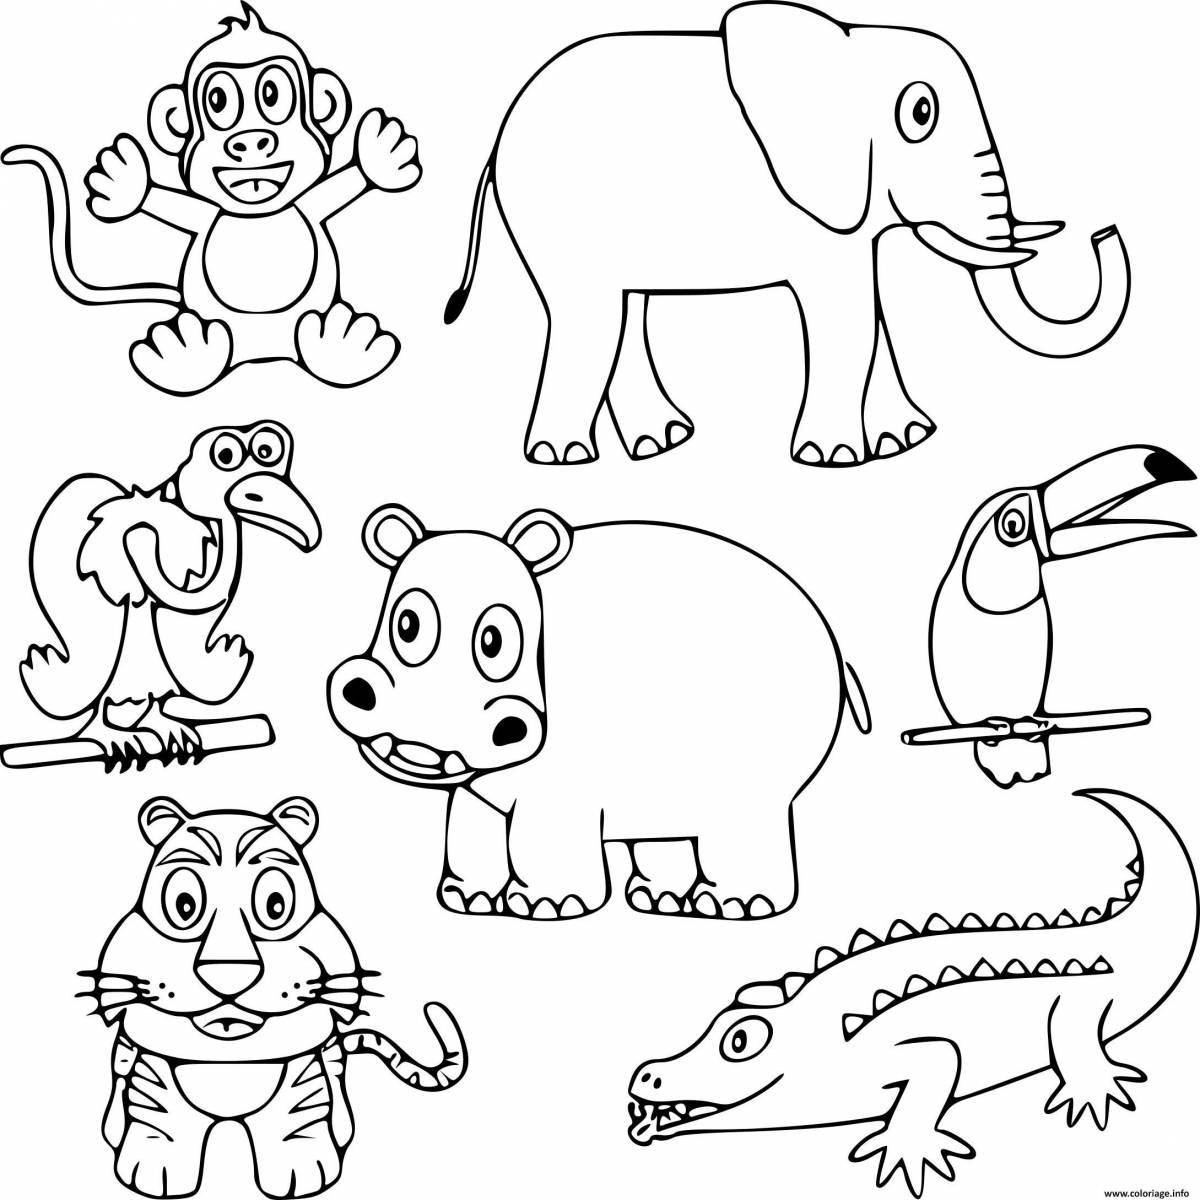 African animals creative coloring book for 3-4 year olds